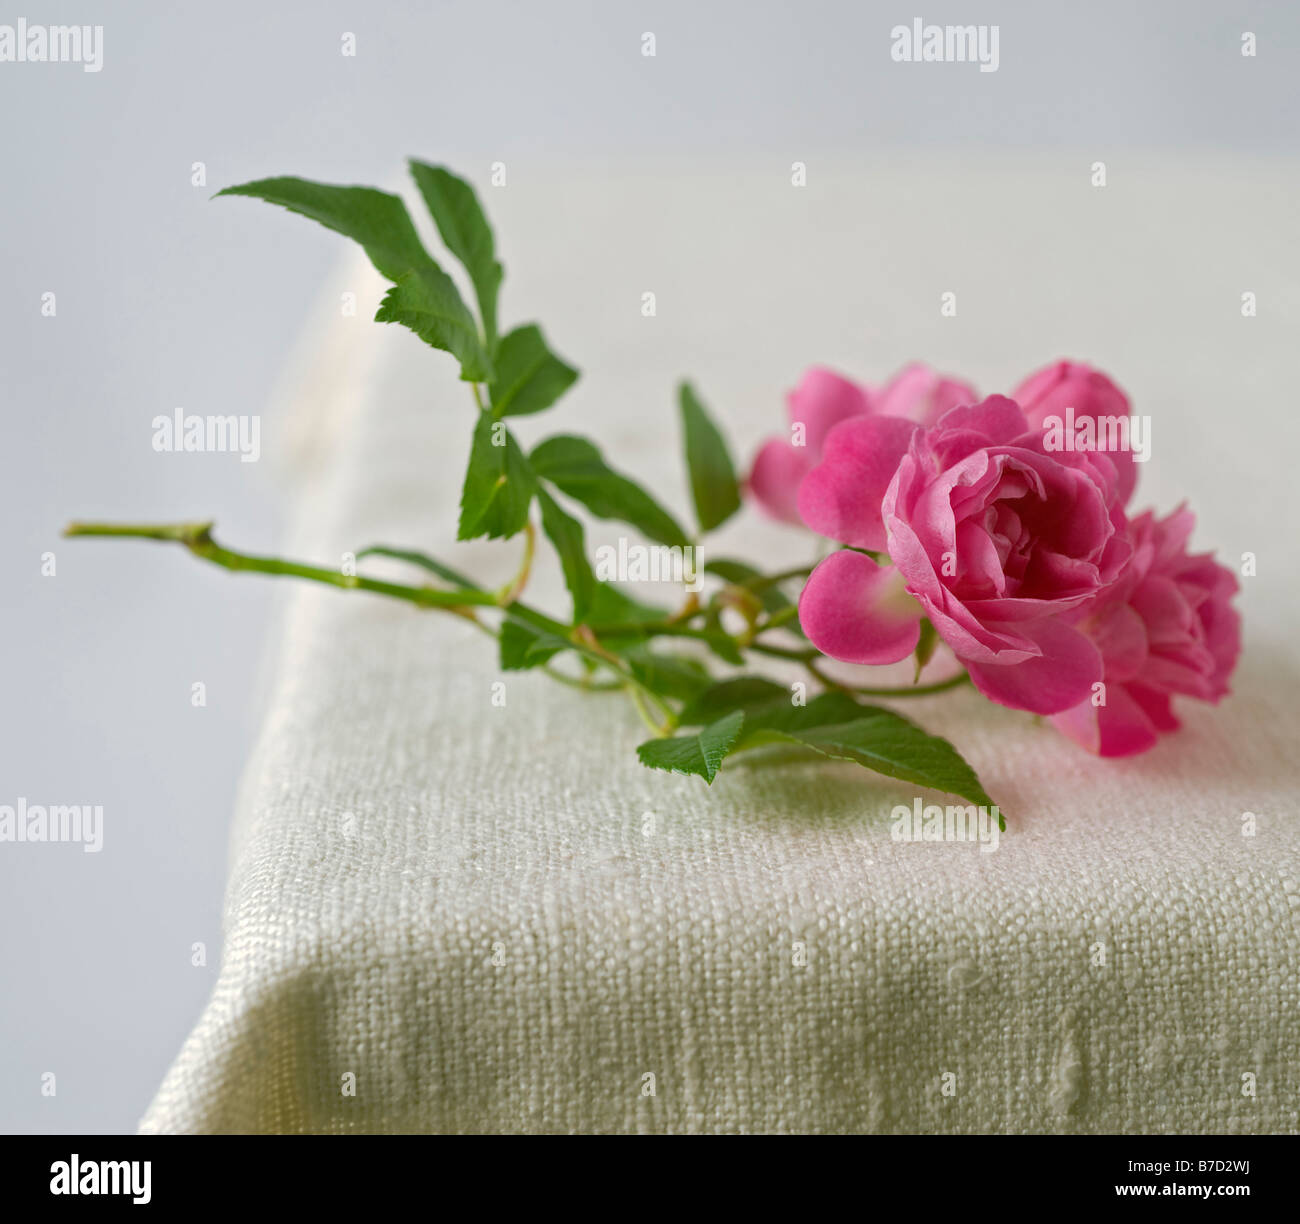 small pink roses on rustic fabric Stock Photo